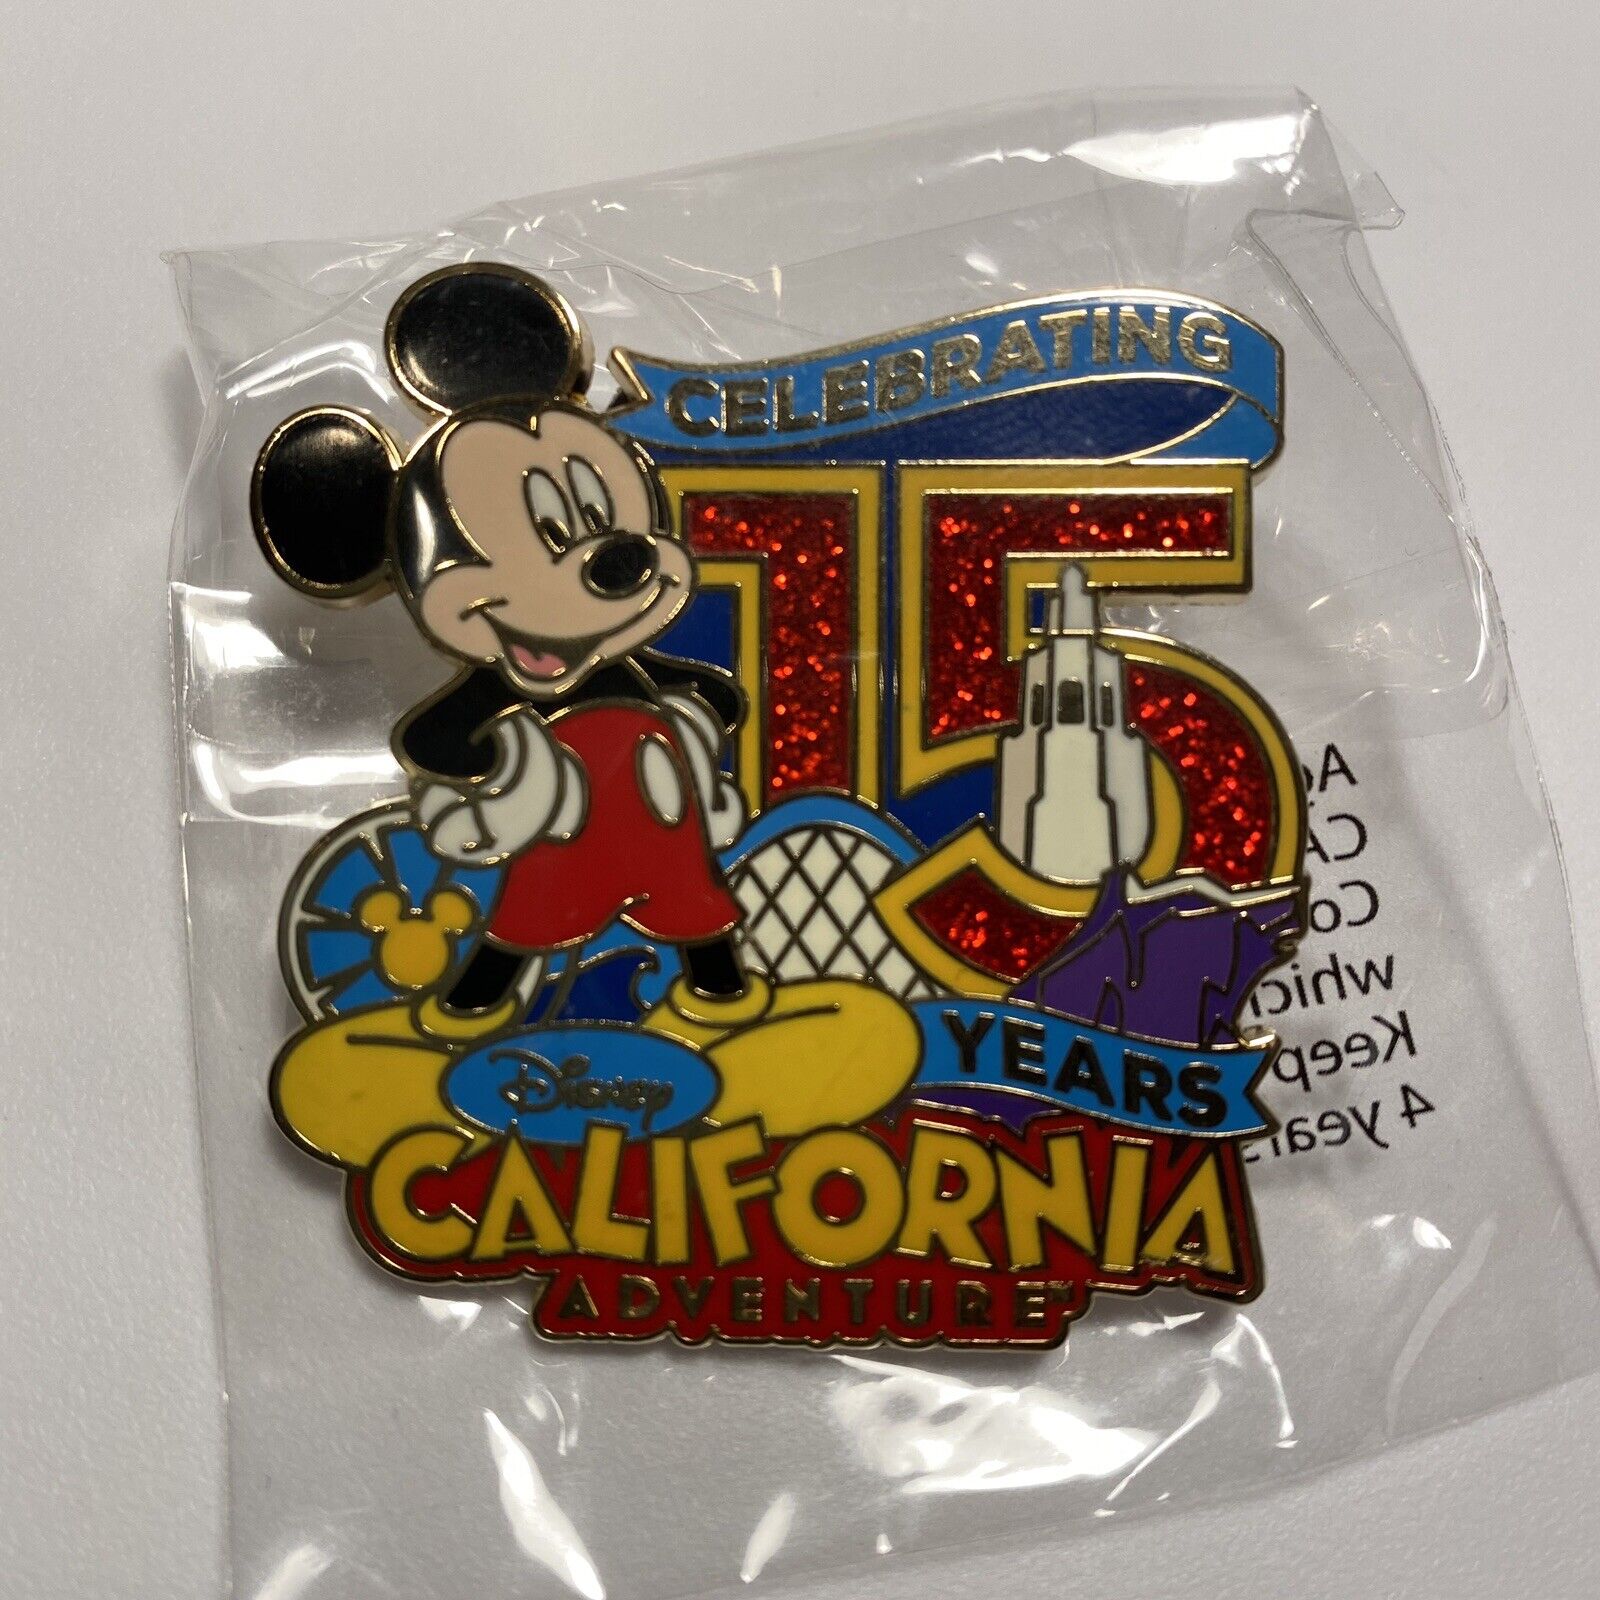 Disneyland Mickey Mouse DLR Cast Exclusive Pin Celebrating 15 Years CA Adventure